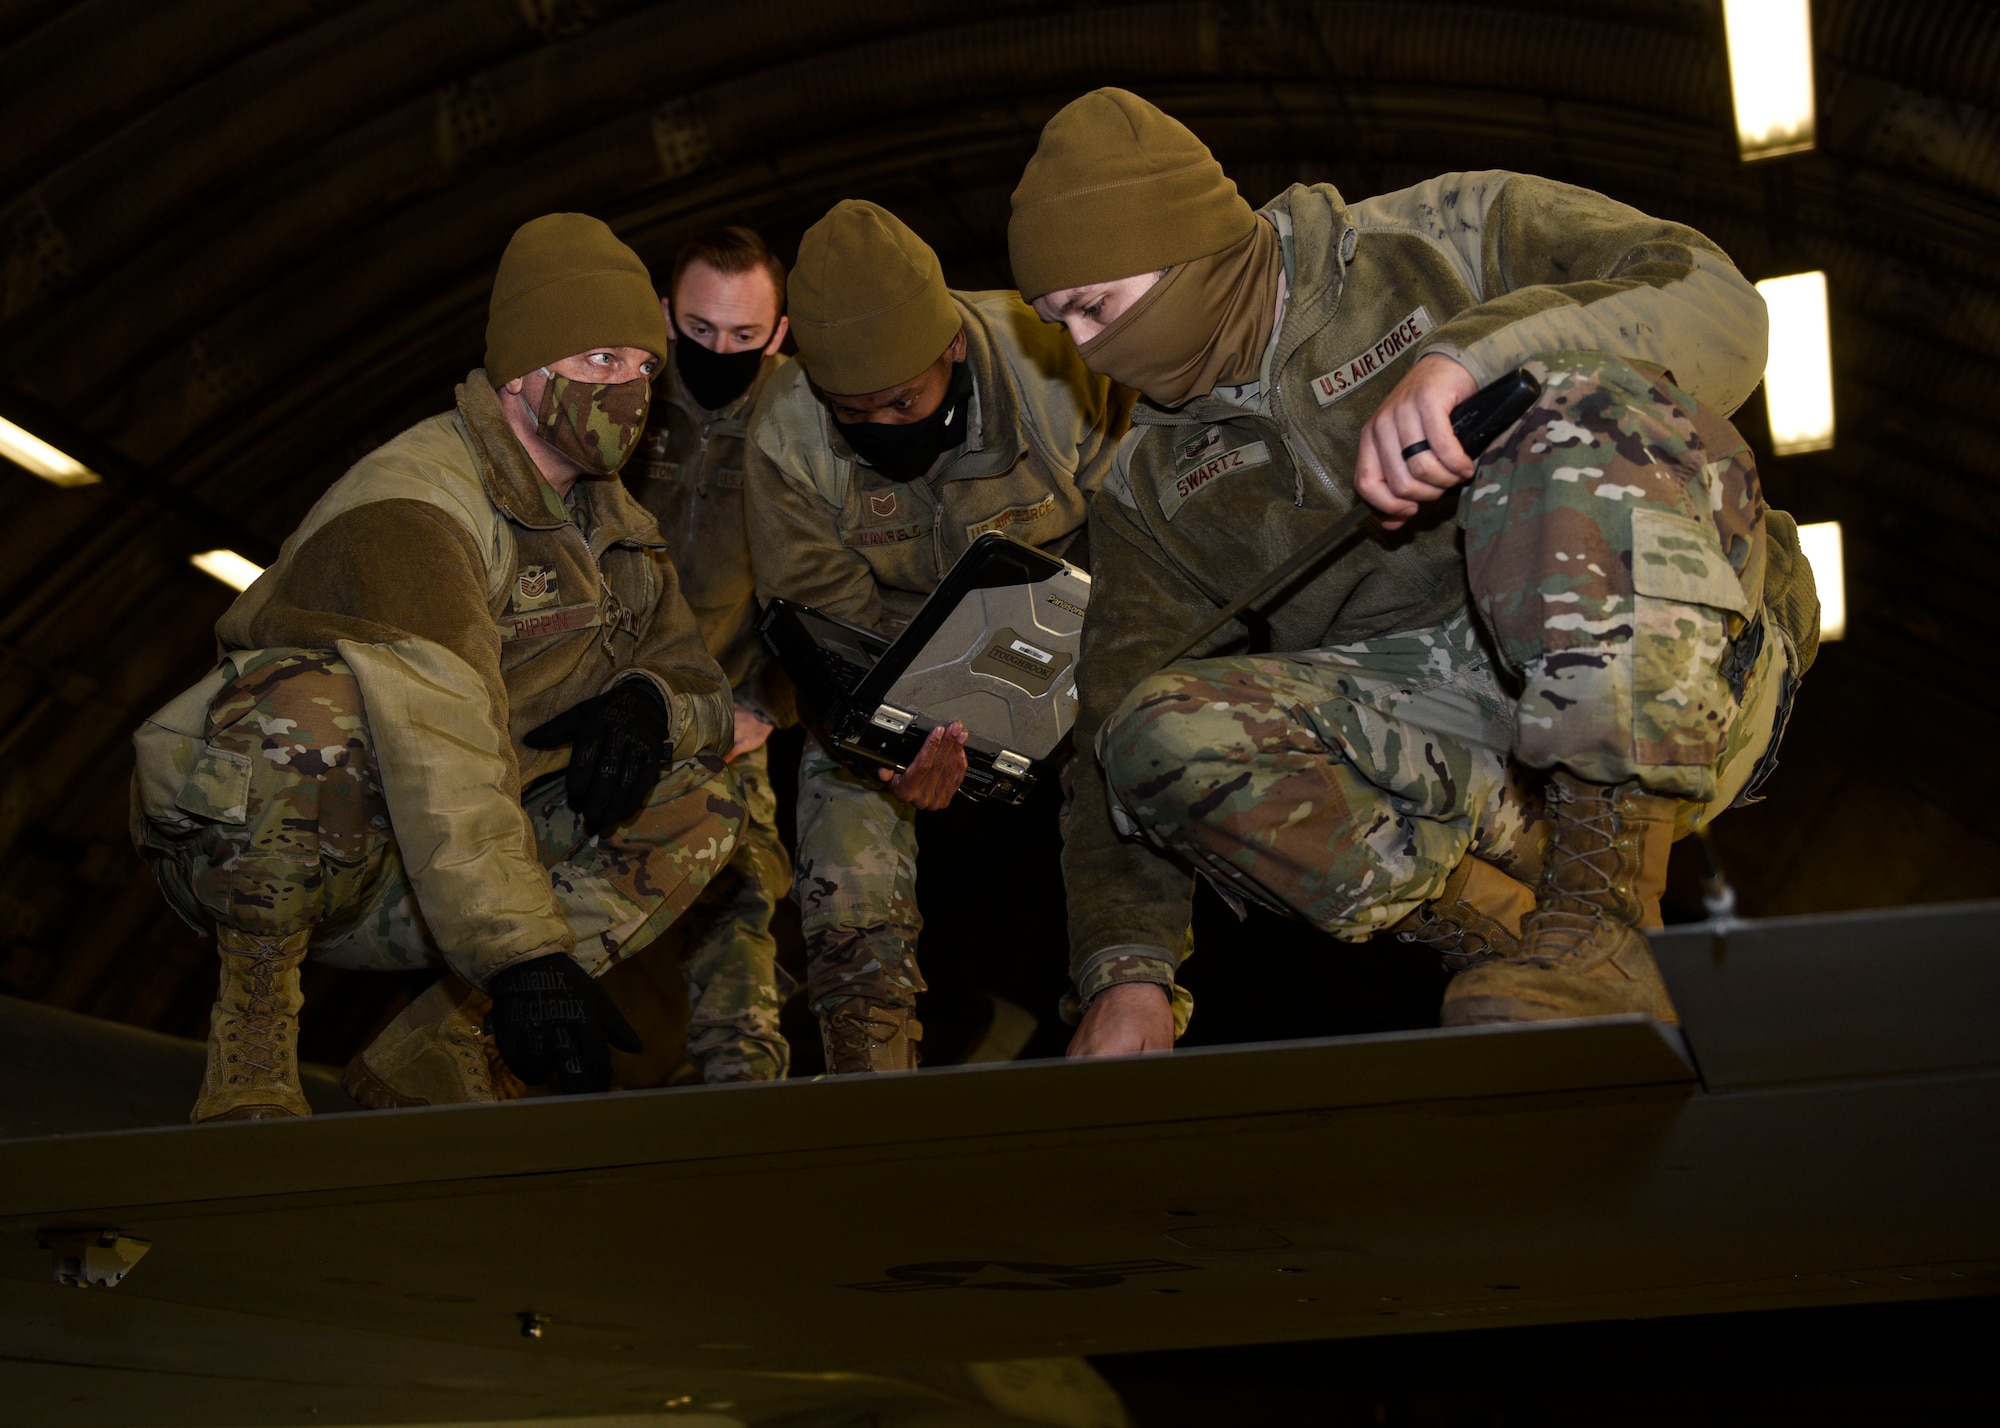 From far left, U.S. Air Force Tech Sgt. Bradley Pippin, 52nd Maintenance Group maintenance training instructor, Staff Sgt. Joseph Livingston, 52nd MXG maintenance training instructor, Tech Sgt. Jeremy Mayfield, 52nd Maintenance Squadron engine technician, and Tech Sgt. Alec Swartz, 52nd Aircraft Maintenance Squadron avionics specialist, perform an inspection on the wing of an F-16 Fighting Falcon, Dec. 9, 2020, at Spangdahlem Air Base, Germany. The inspection was part of an Agile Combat Employment course, which enables Airmen to become more versatile outside of their respective career fields and allow aircraft to increase deterrence capabilities in more remote locations. (U.S. Air Force photo by Senior Airman Melody W. Howley)